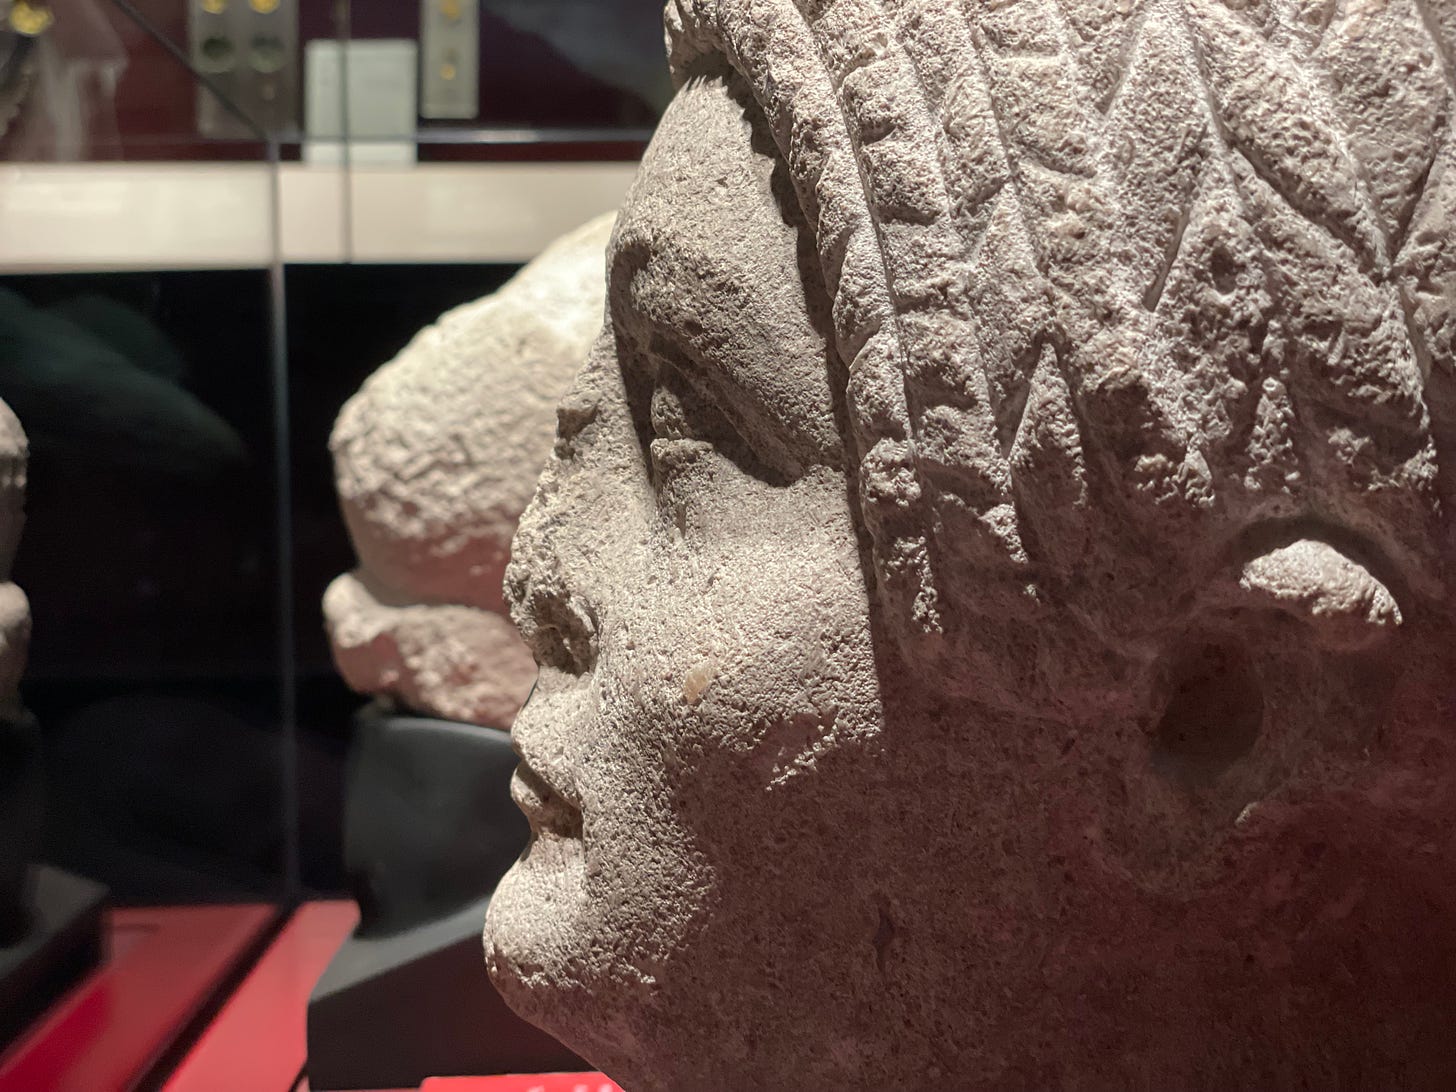 The stone head of a Roman lady excavated from a derelict Norman church at Stoke Mandeville Buckinghamshire